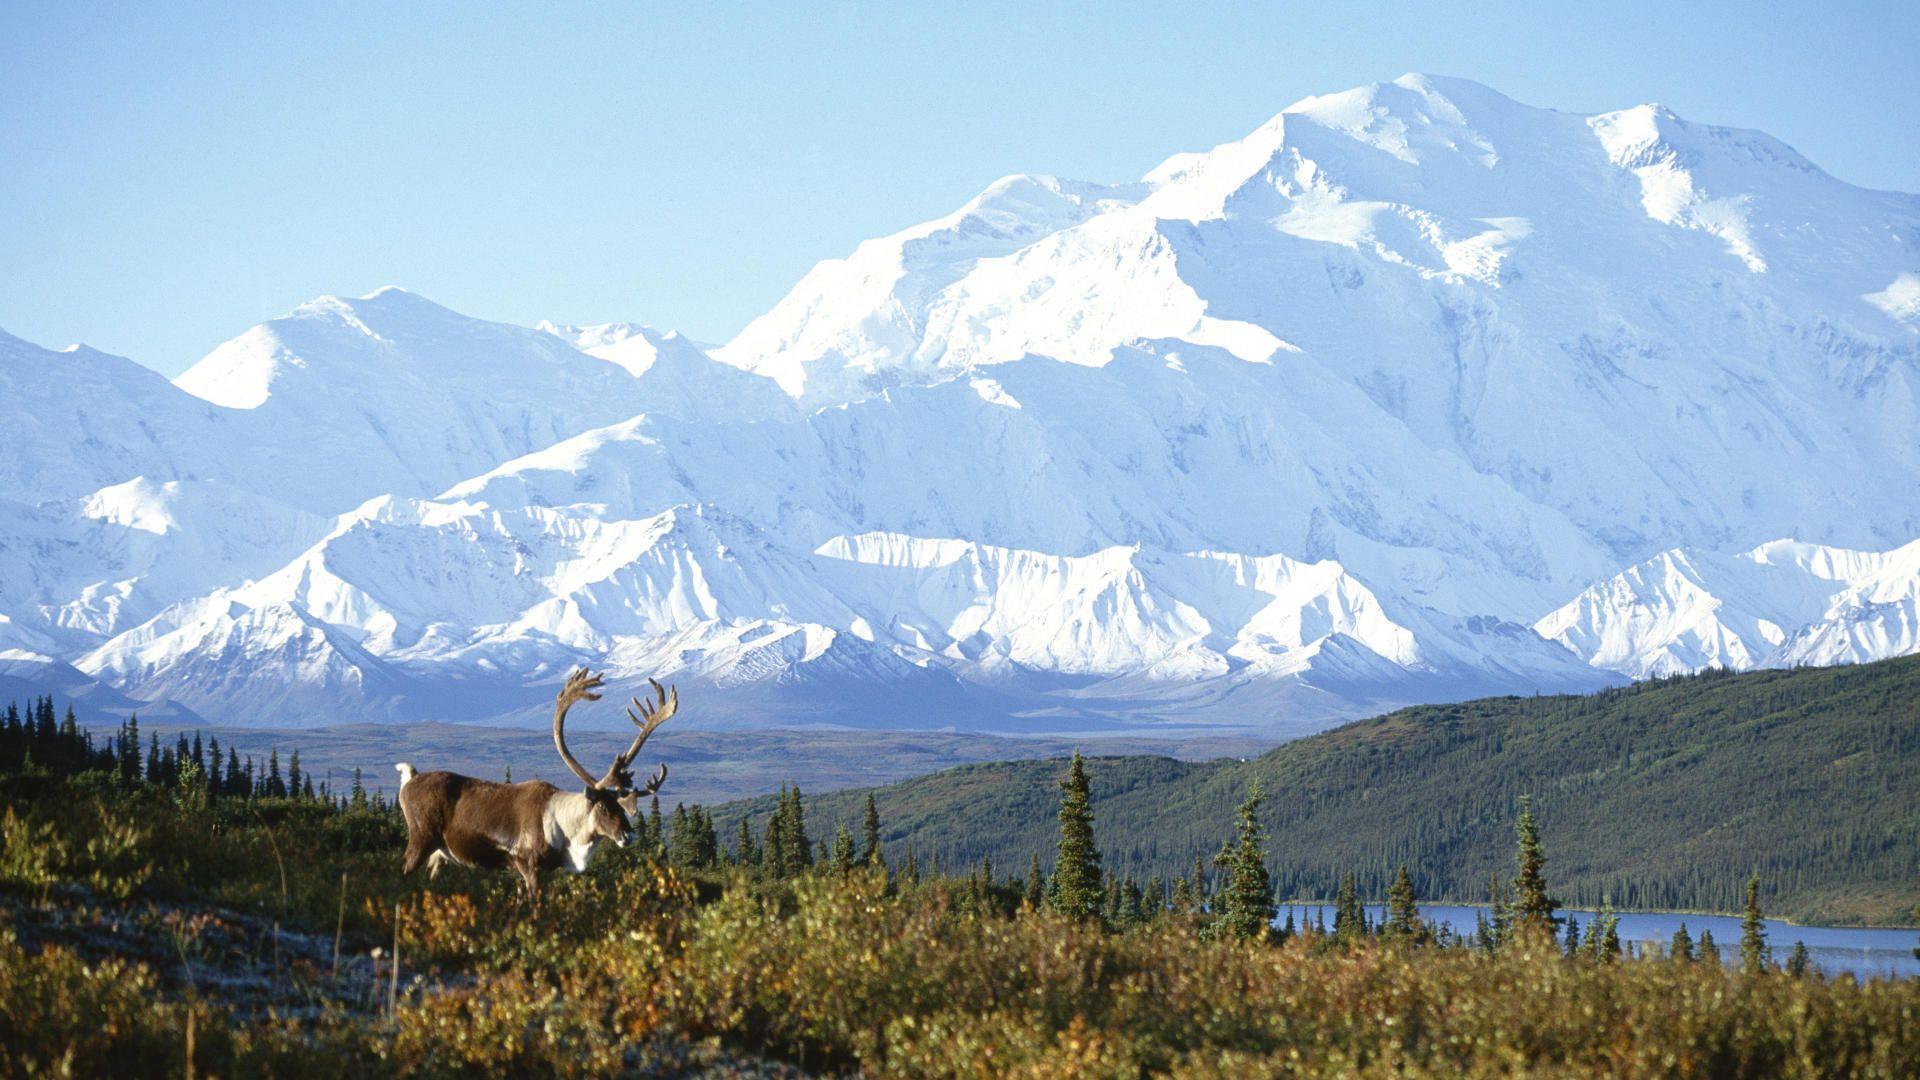 Download Background and Mount McKinley, Denali National